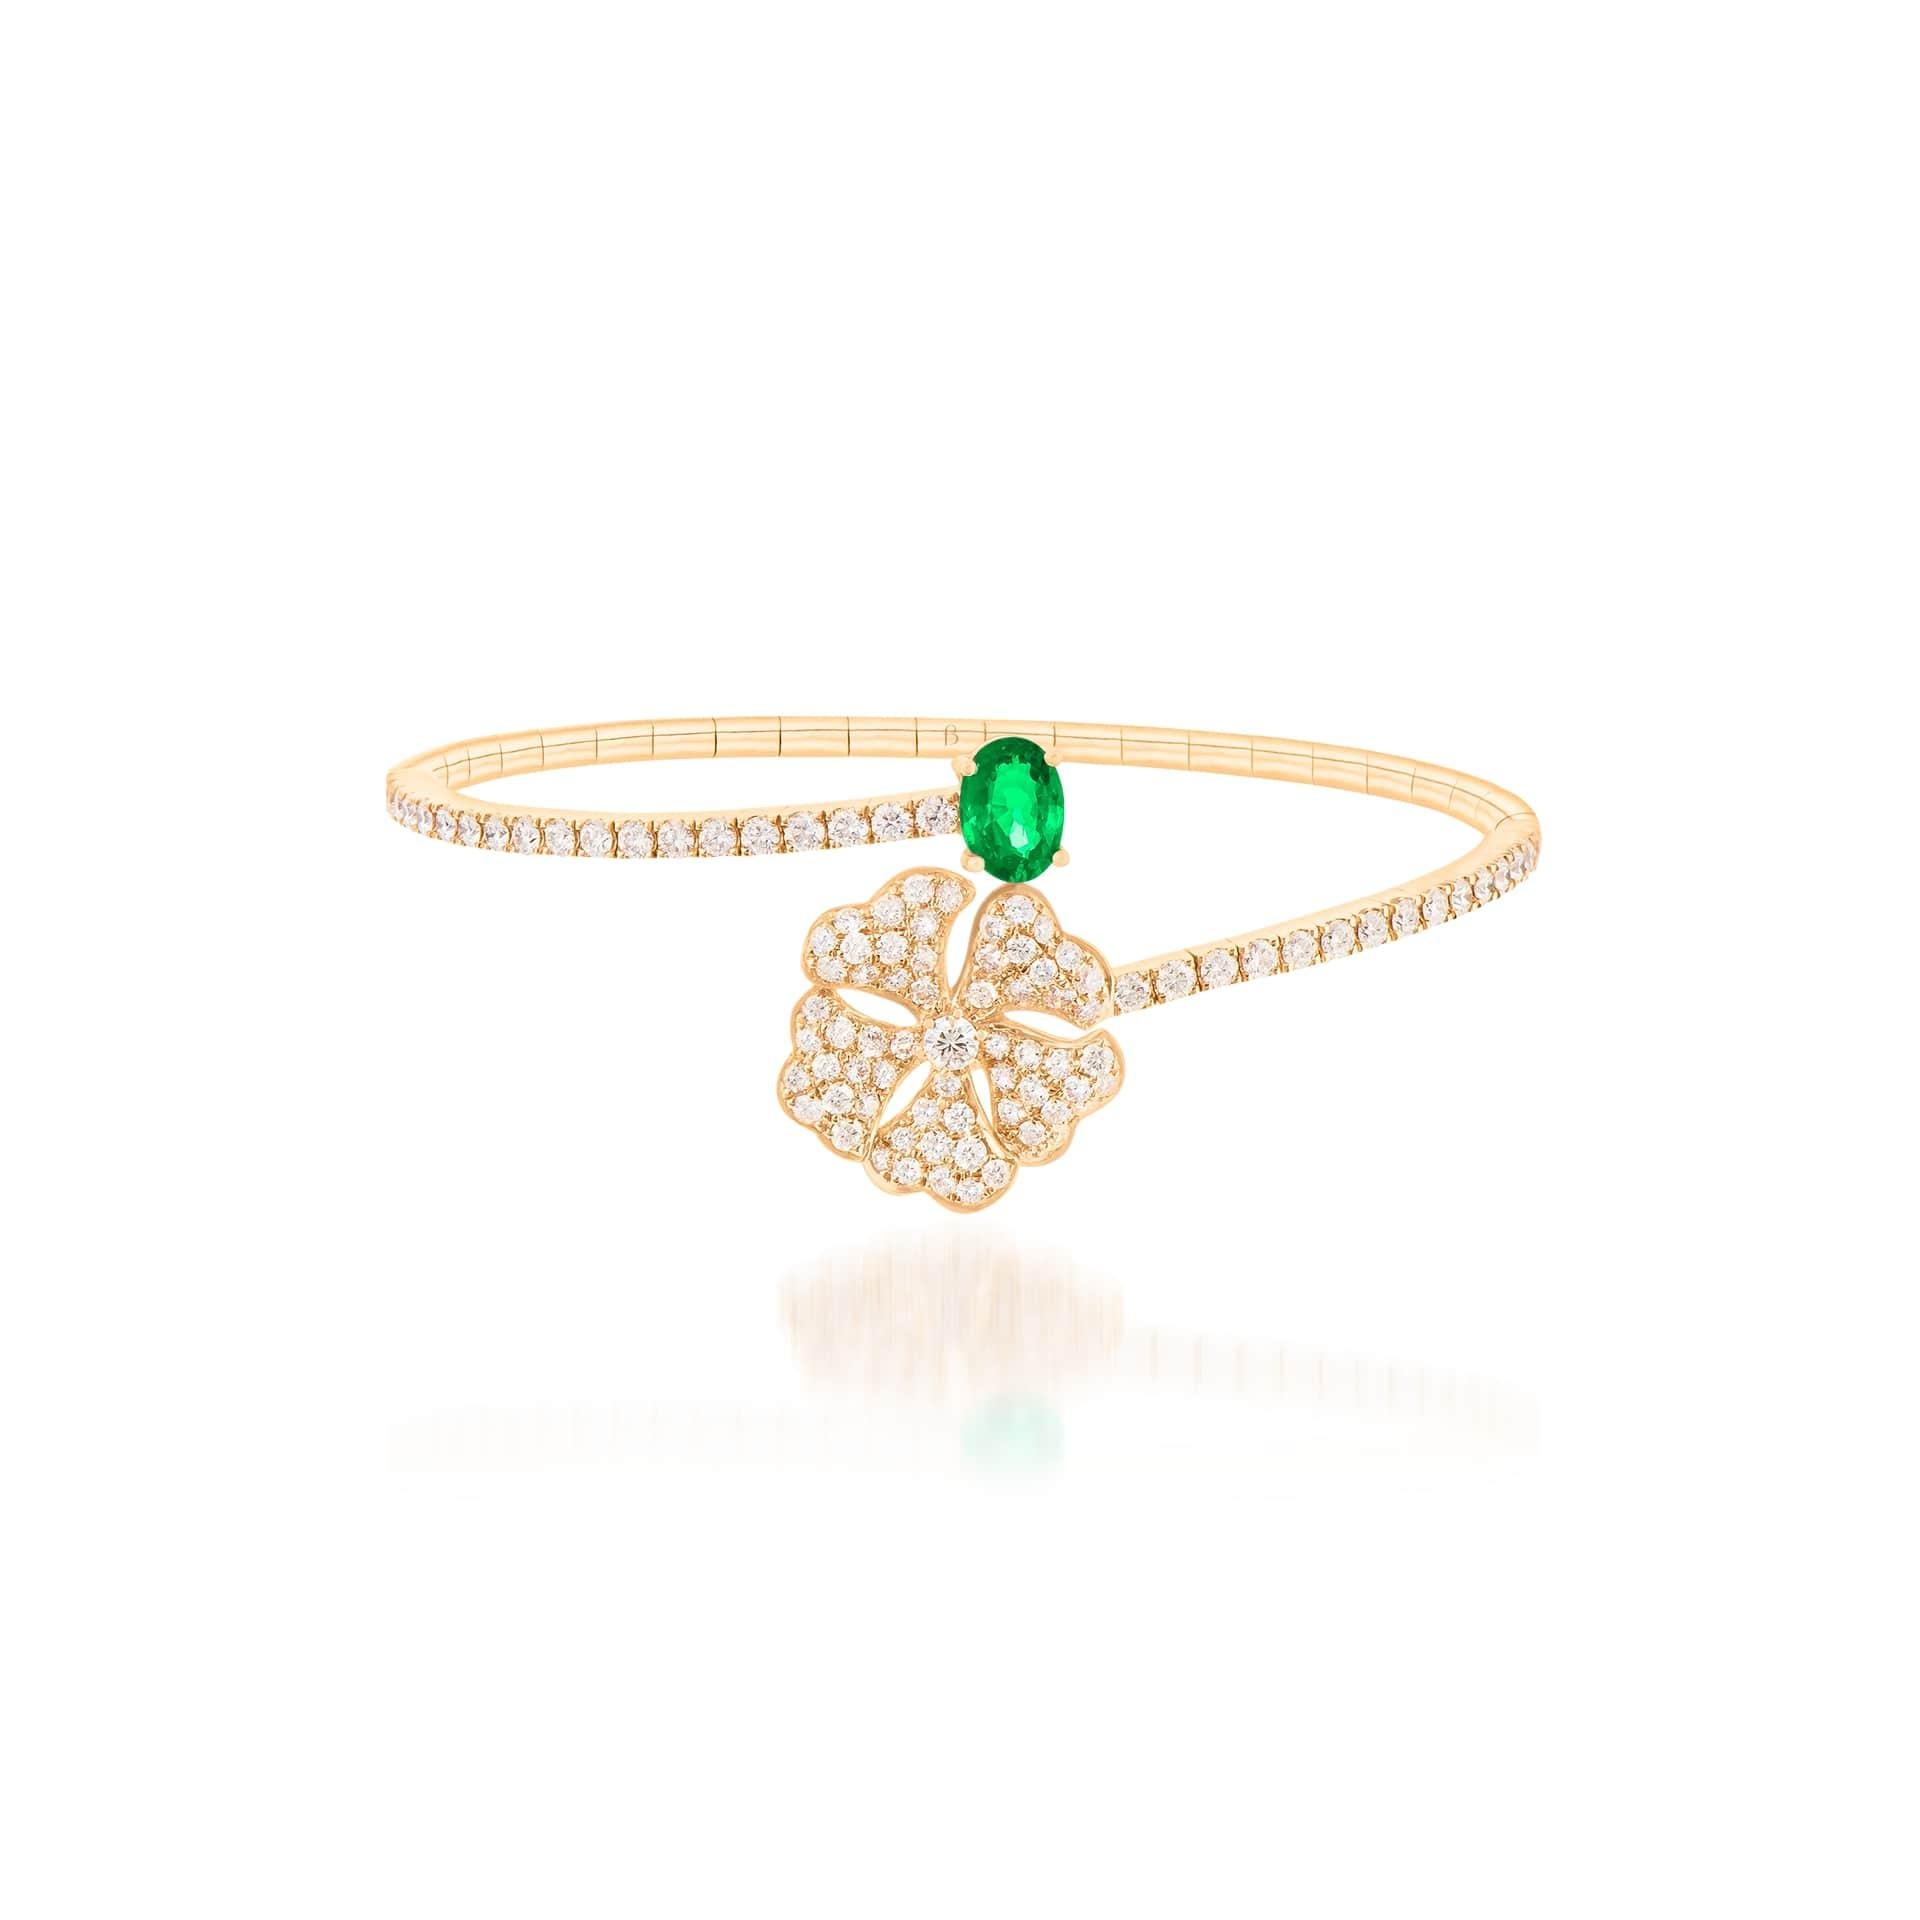 Bloom Emerald and Diamond Open Spiral Bangle in 18K Yellow Gold

Inspired by the exquisite petals of the alpine cinquefoil flower, the Bloom collection combines the richness of diamonds and precious metals with the light versatility of this